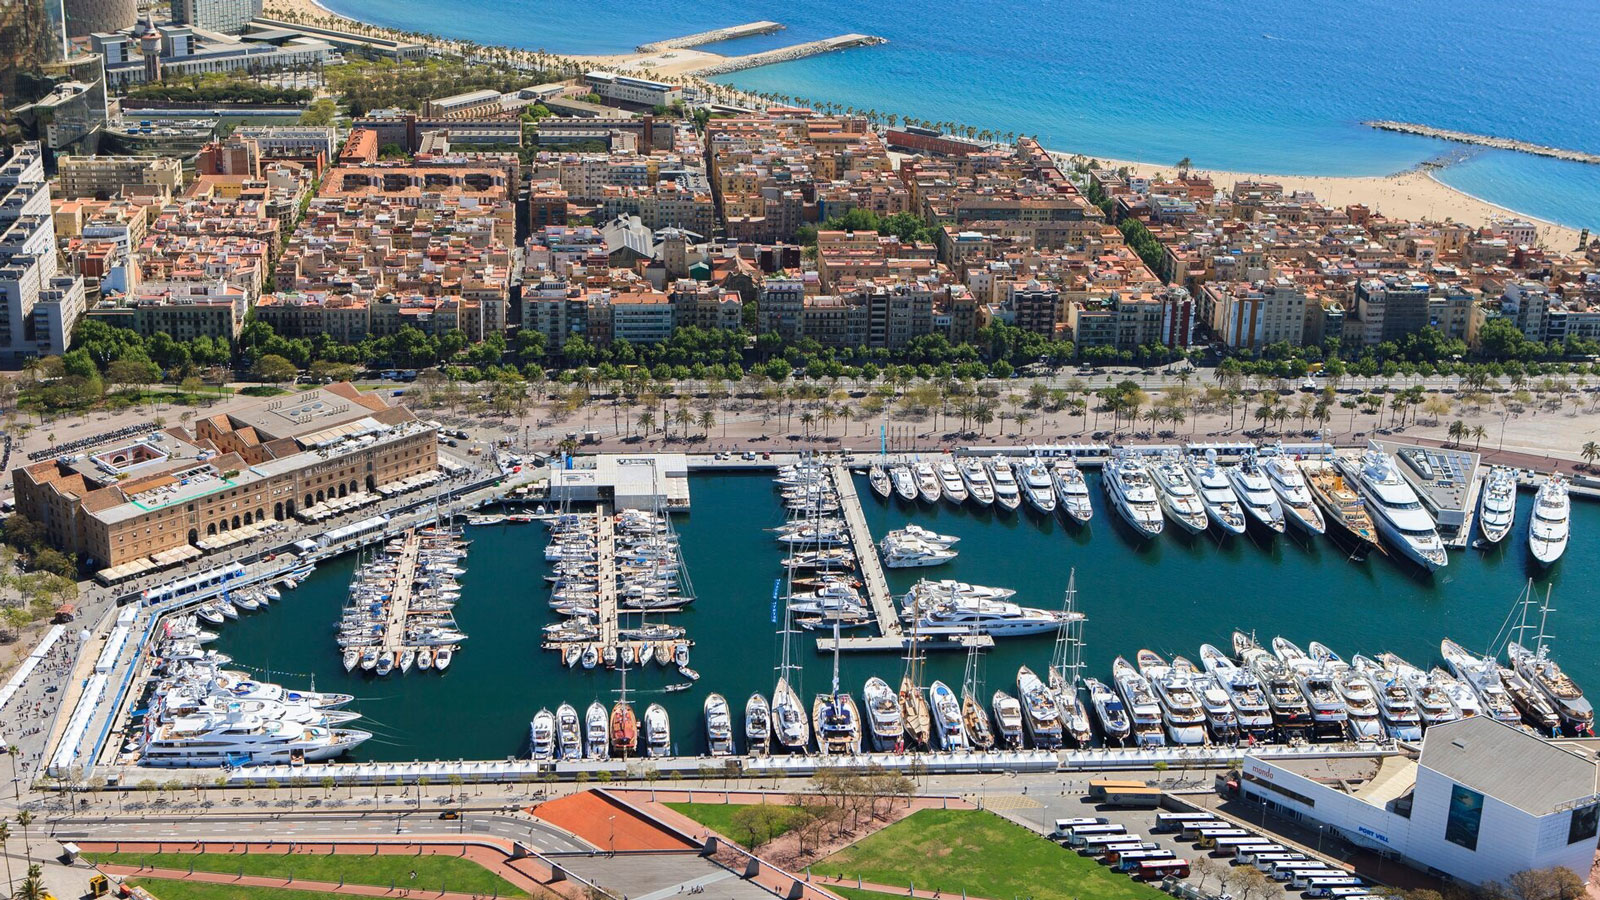 Marina Port Vell is the official location for America's Cup 2024